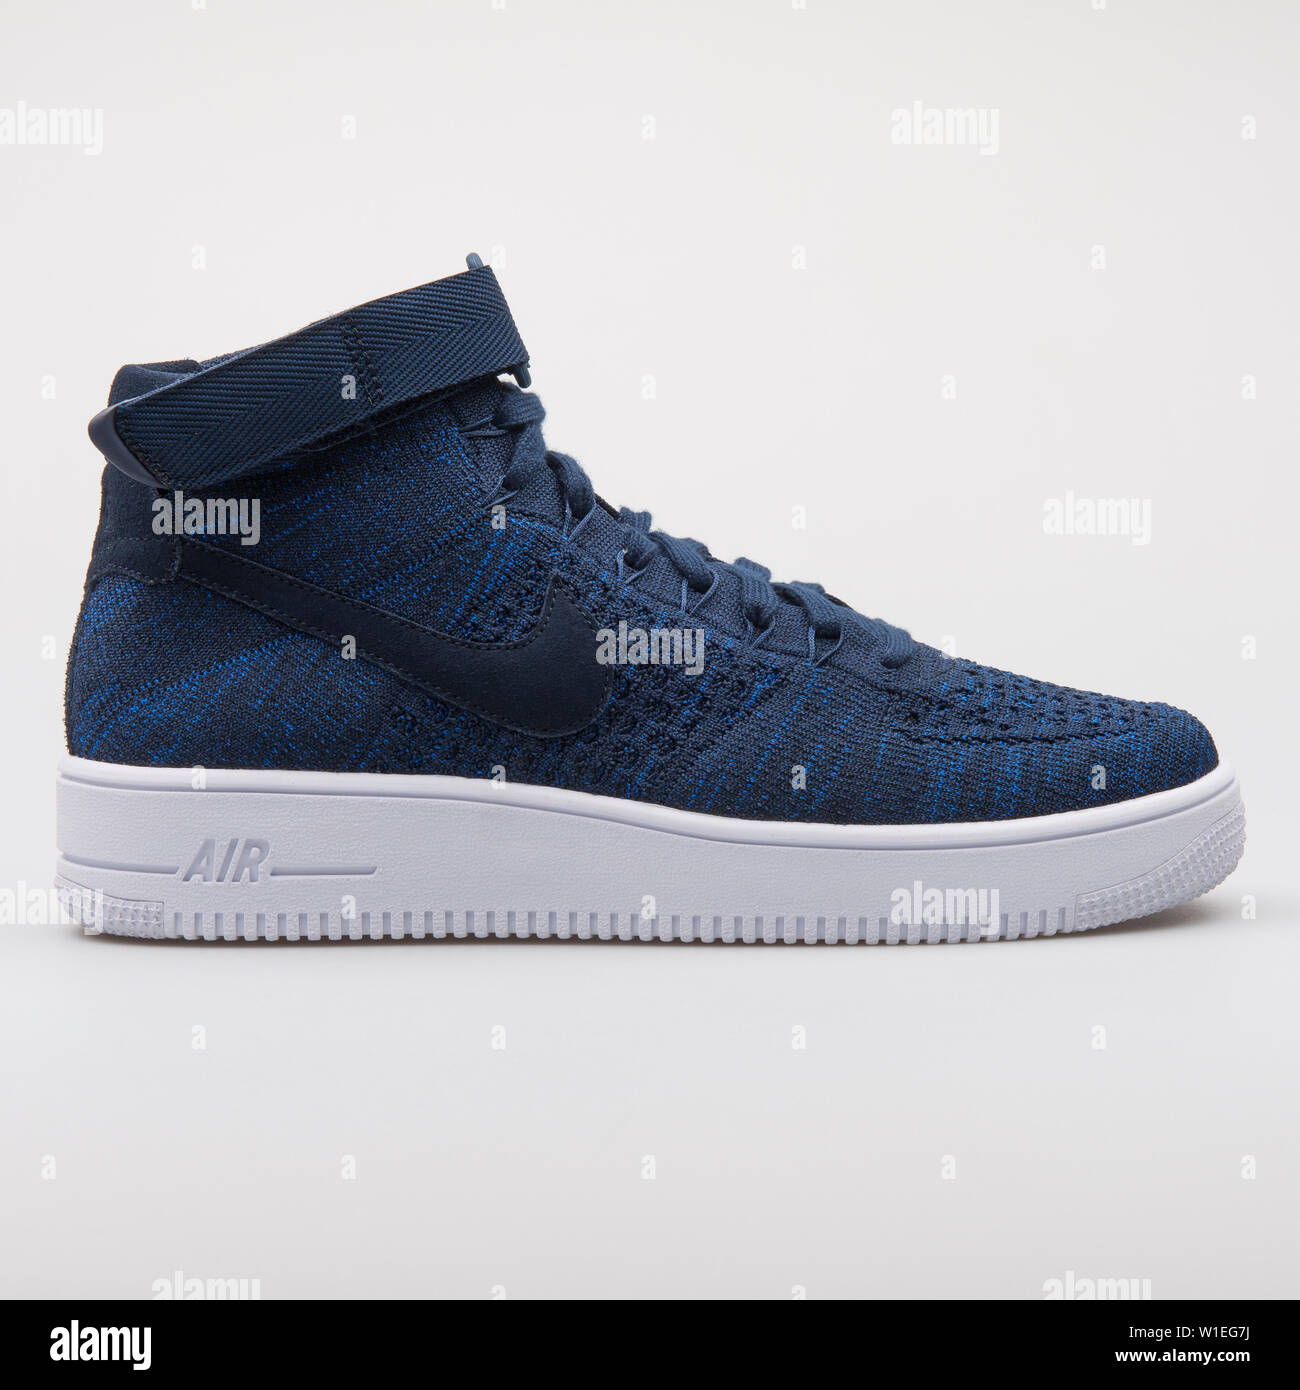 VIENNA, AUSTRIA - AUGUST 7, 2017: Nike Air Force 1 Ultra Flyknit Mid navy  blue sneaker on white background Stock Photo - Alamy